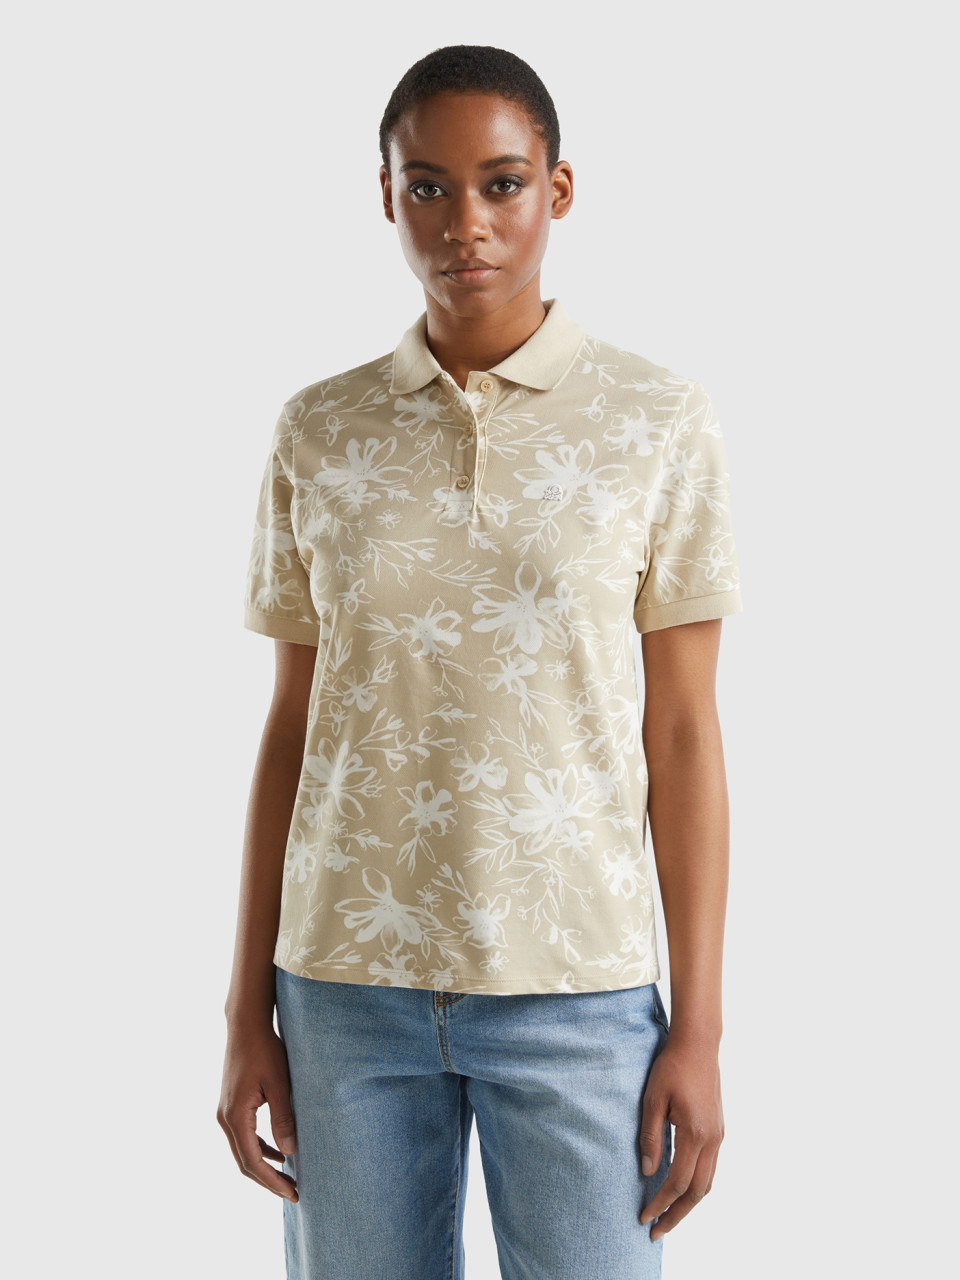 Benetton, Beige Polo With Floral Print, Beige, Women